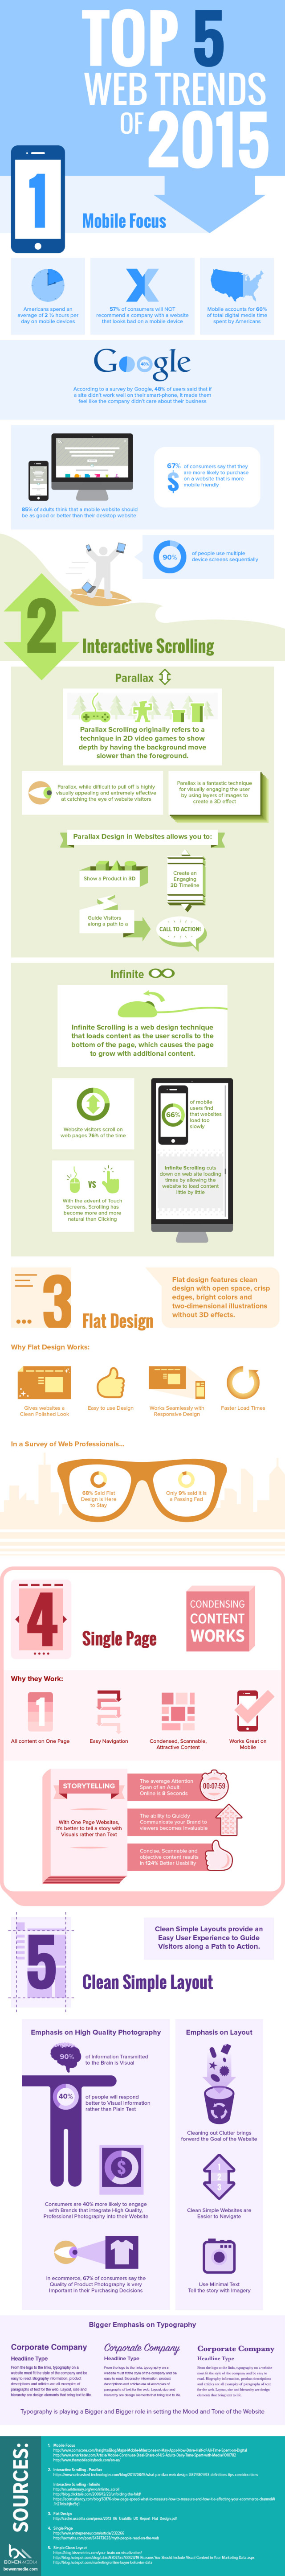 Top 5 web trends for 2015.